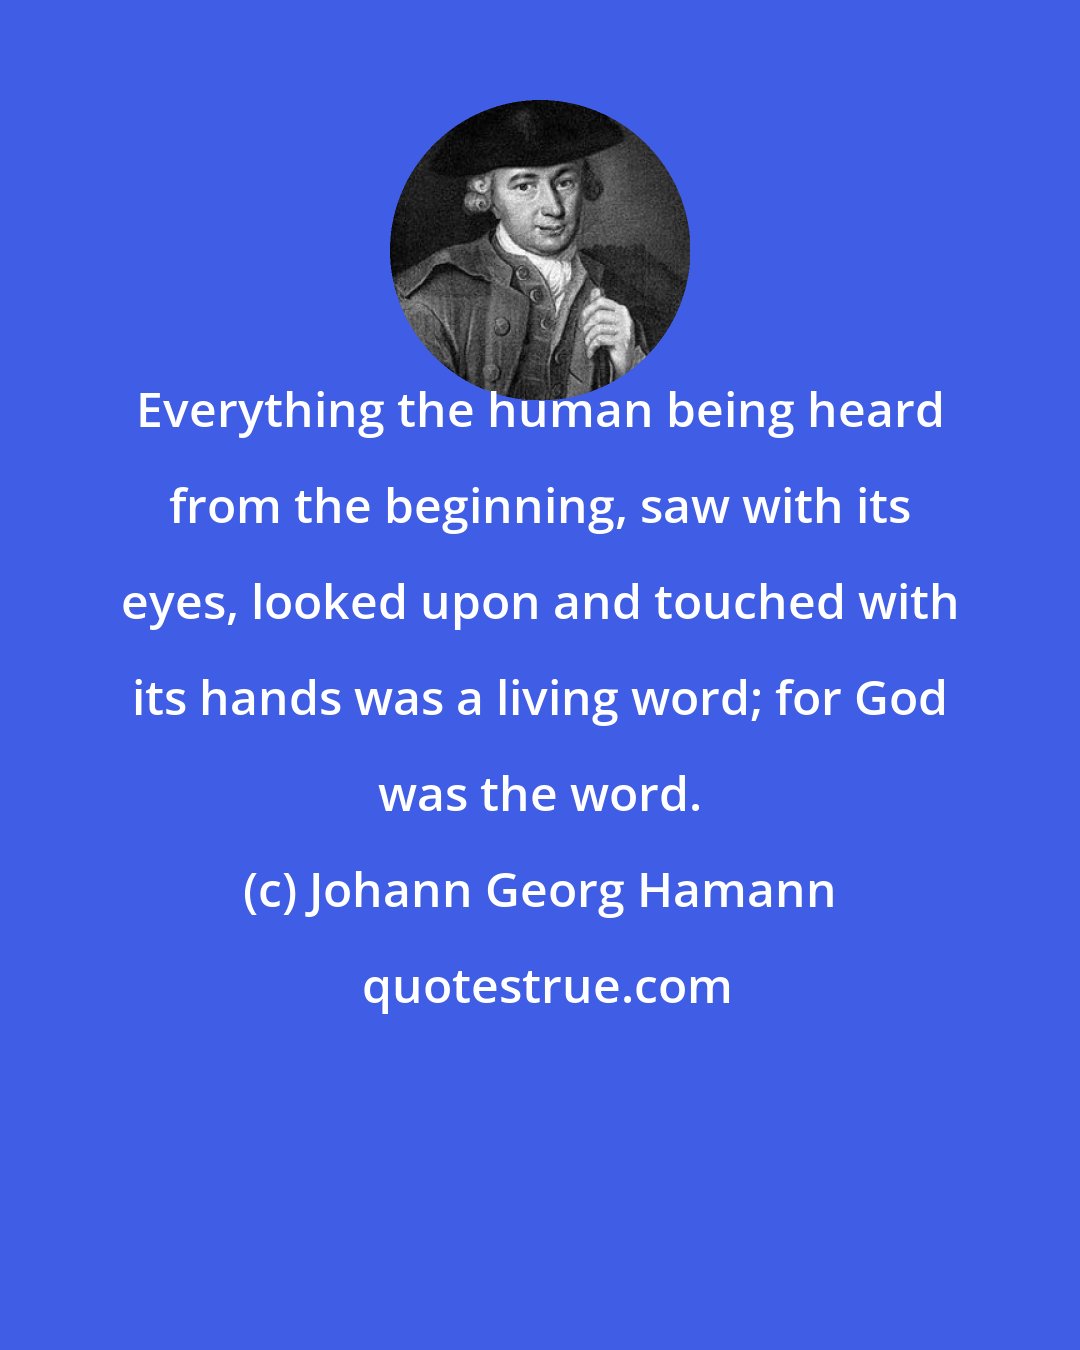 Johann Georg Hamann: Everything the human being heard from the beginning, saw with its eyes, looked upon and touched with its hands was a living word; for God was the word.